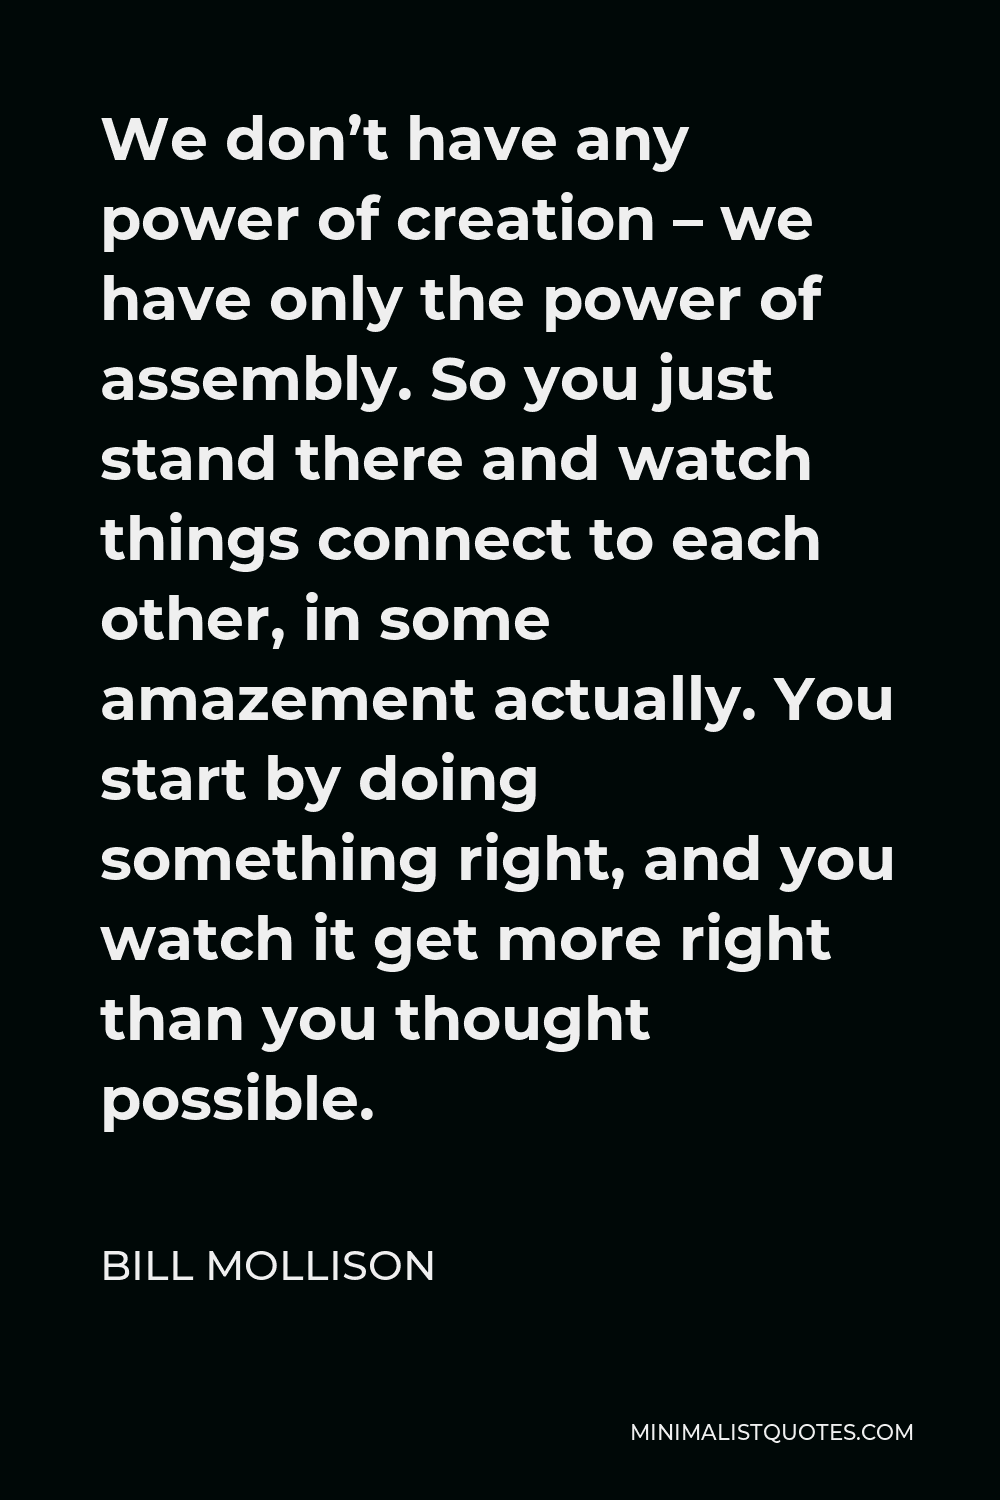 Bill Mollison Quote - We don’t have any power of creation – we have only the power of assembly. So you just stand there and watch things connect to each other, in some amazement actually. You start by doing something right, and you watch it get more right than you thought possible.